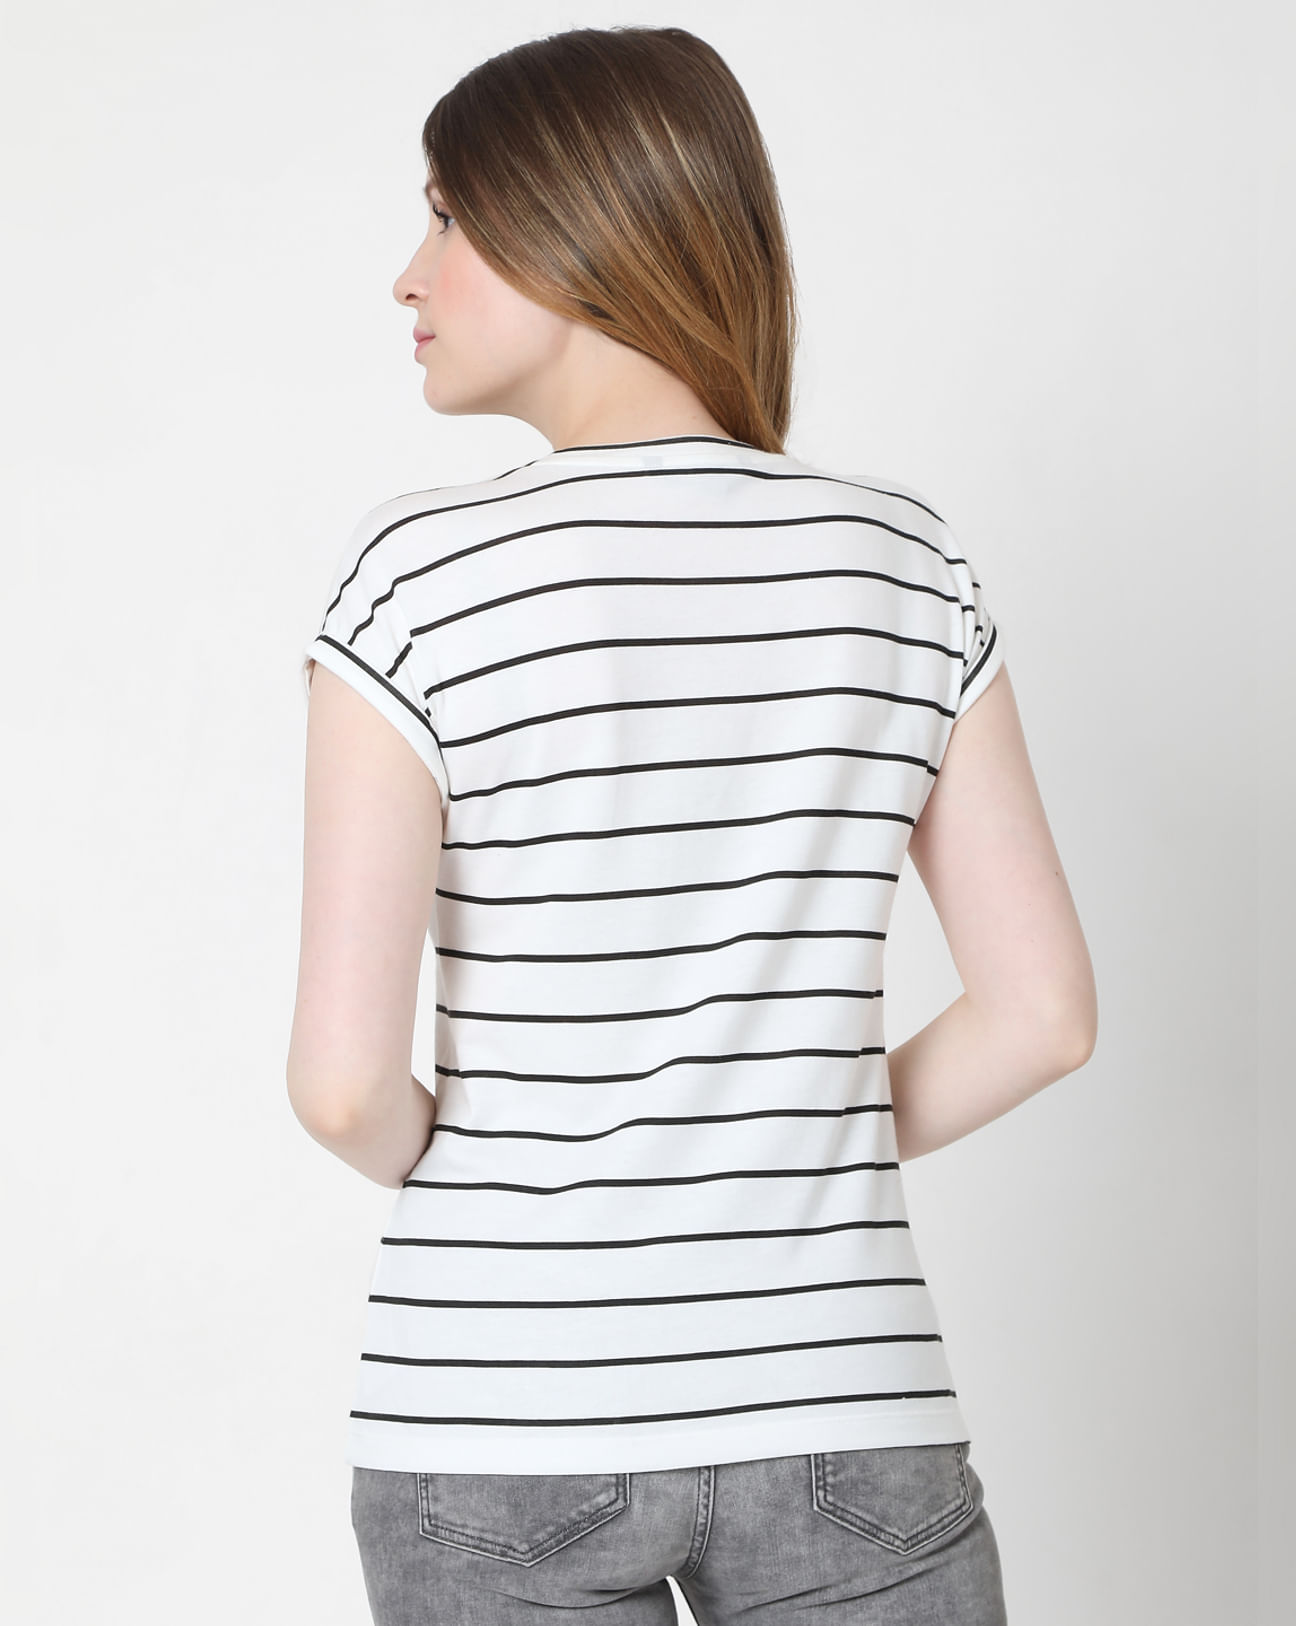 T-Shirts for Women - Buy Online Print In Striped T-shirt Graphic White